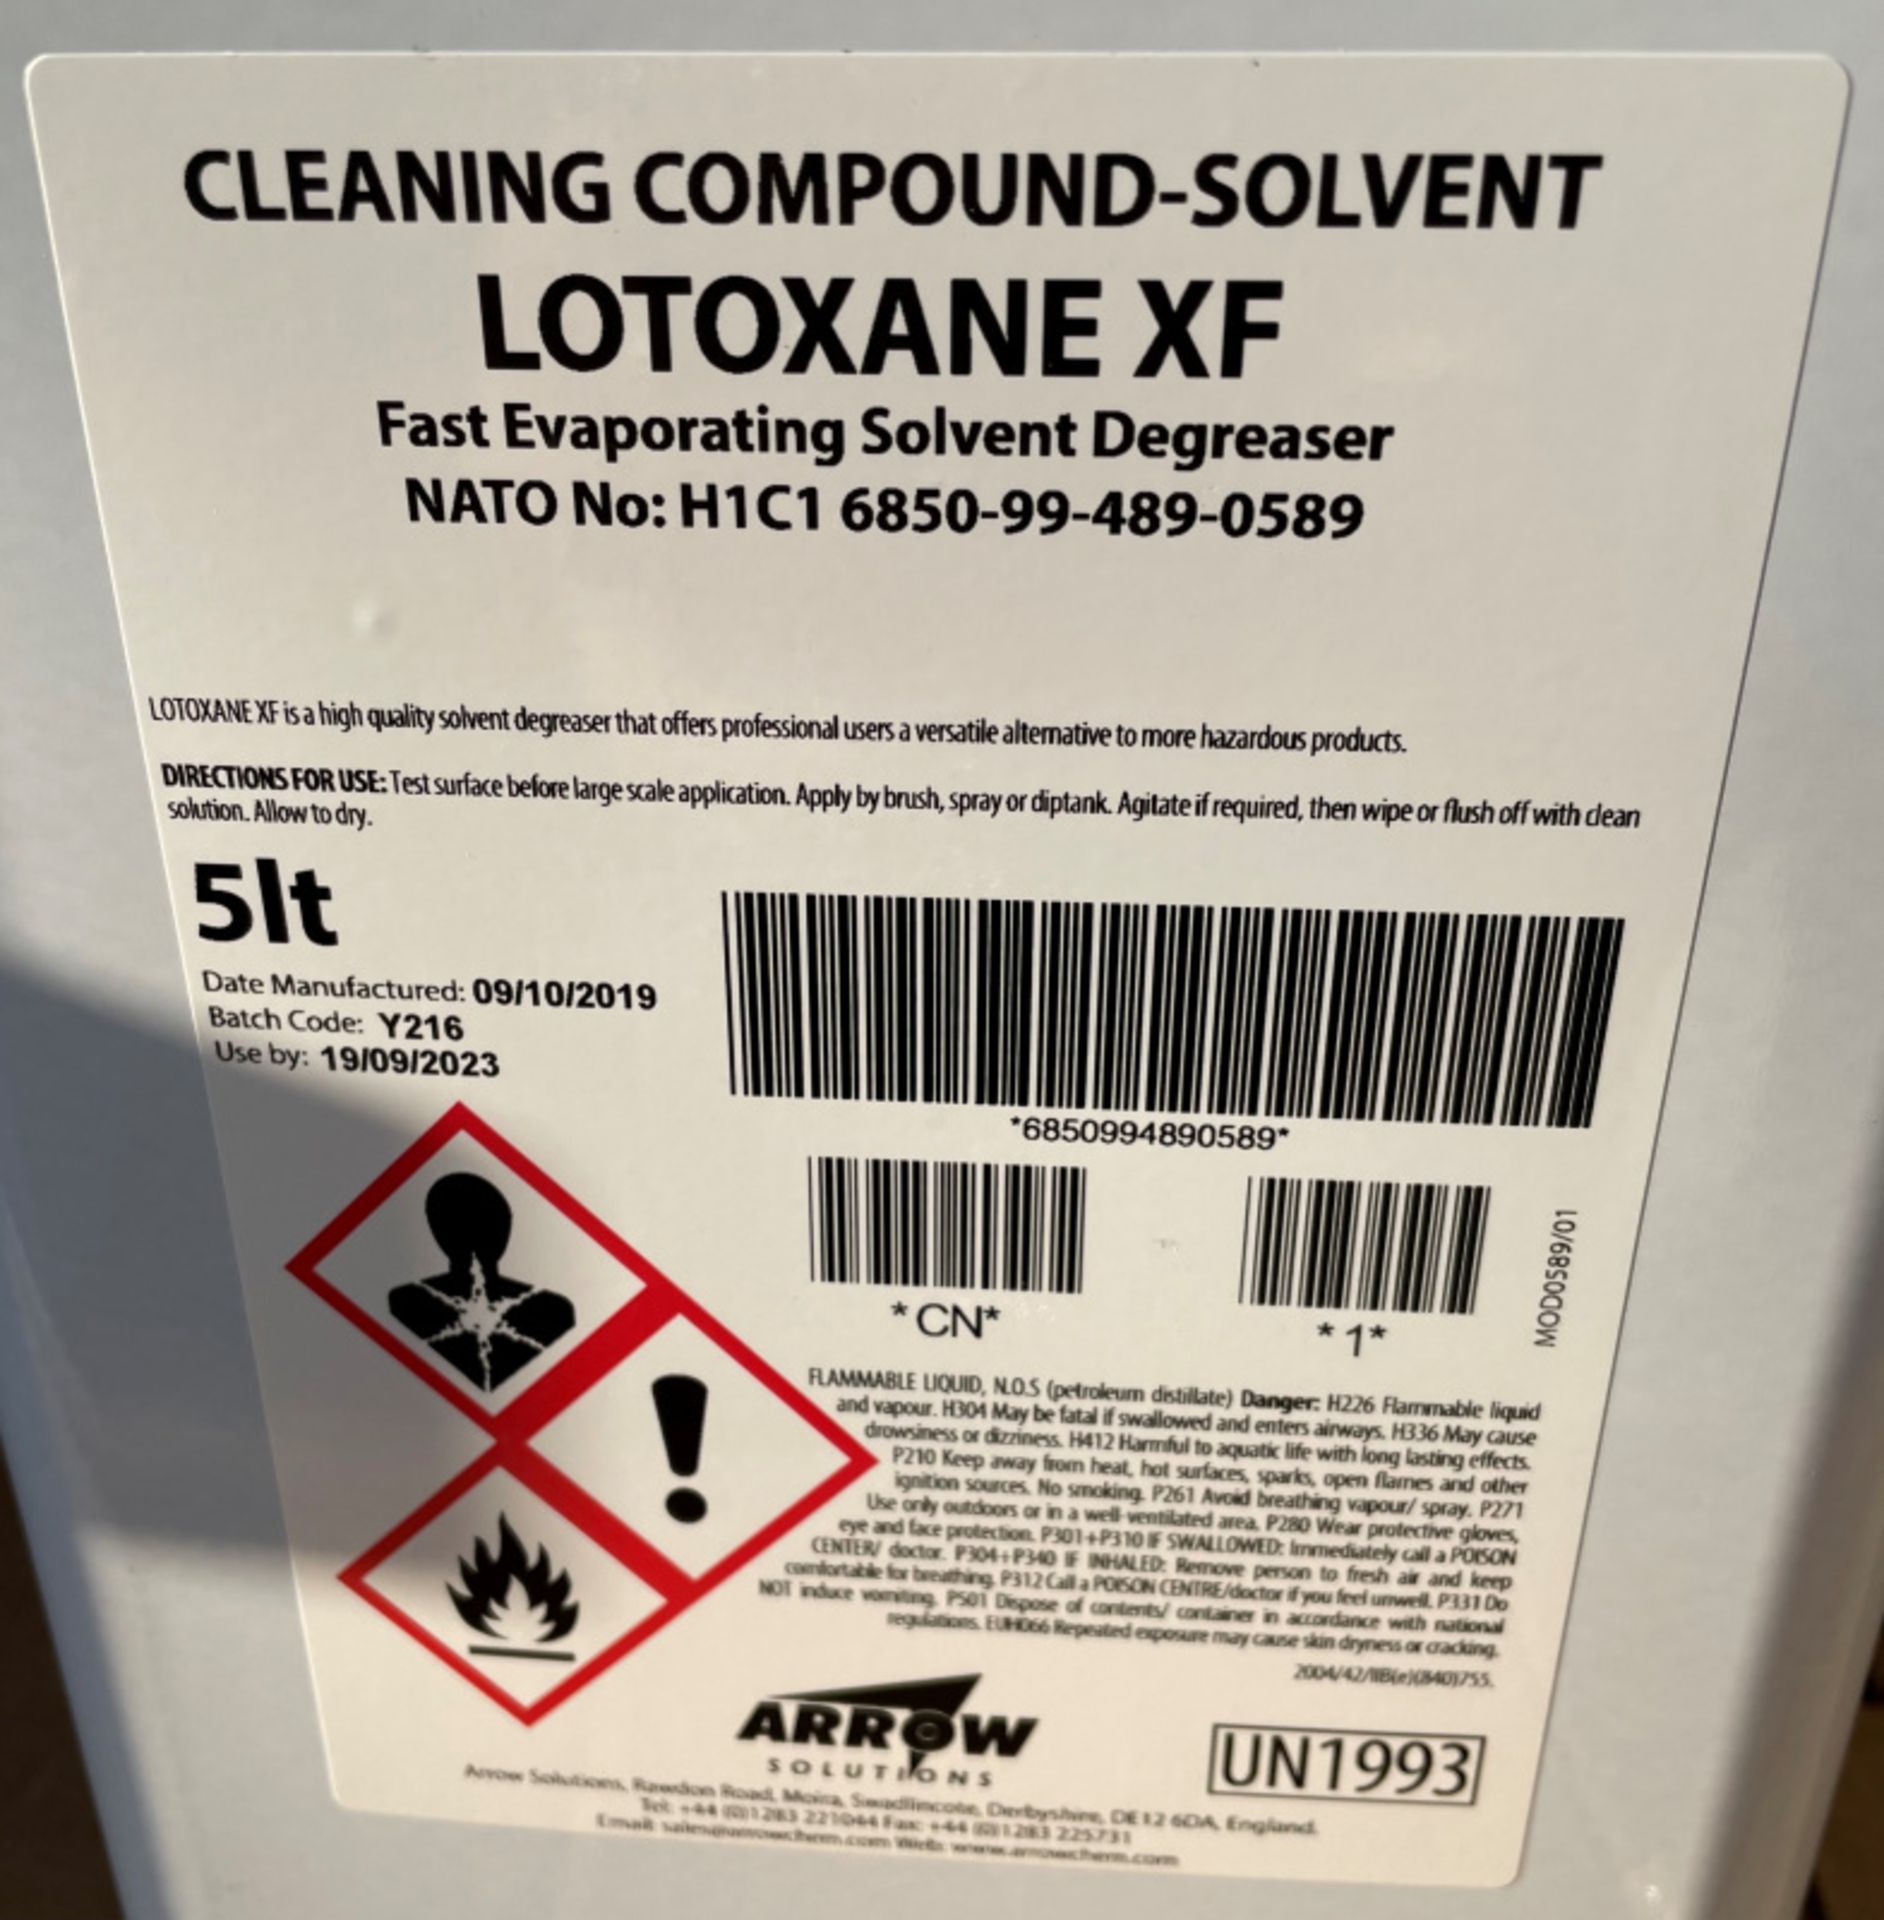 Arrow Lotoxane XF fast evaporating solvent degreaser cleaner compound solvent 5LT bottles - Image 2 of 3